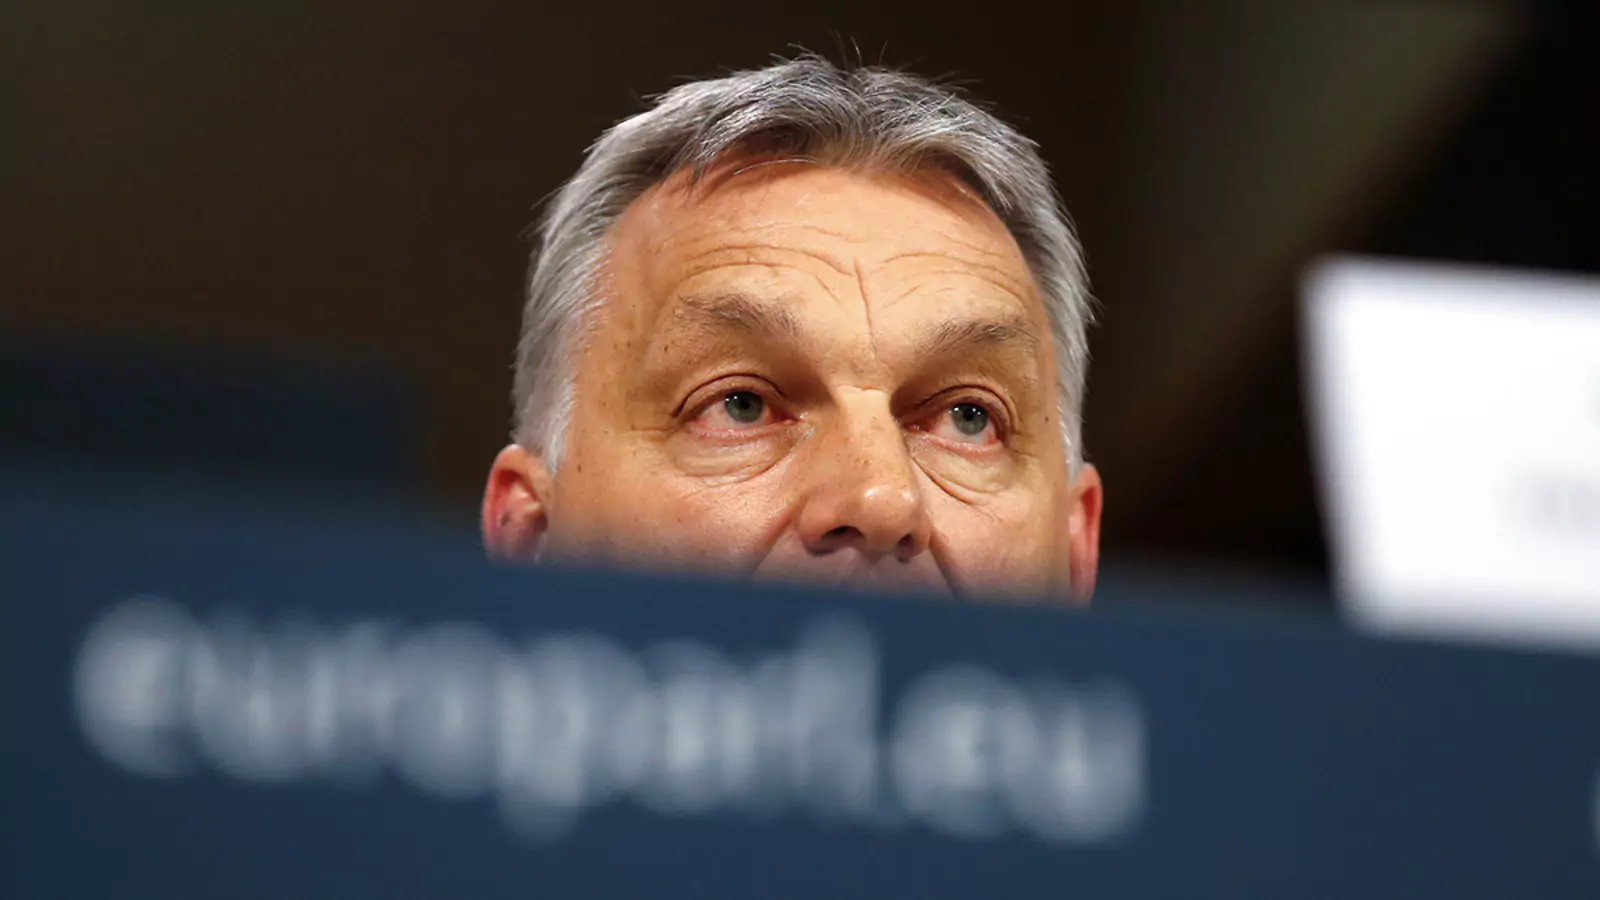 Hungary's Prime Minister Viktor Orban attends a news conference in Brussels, March 2019.